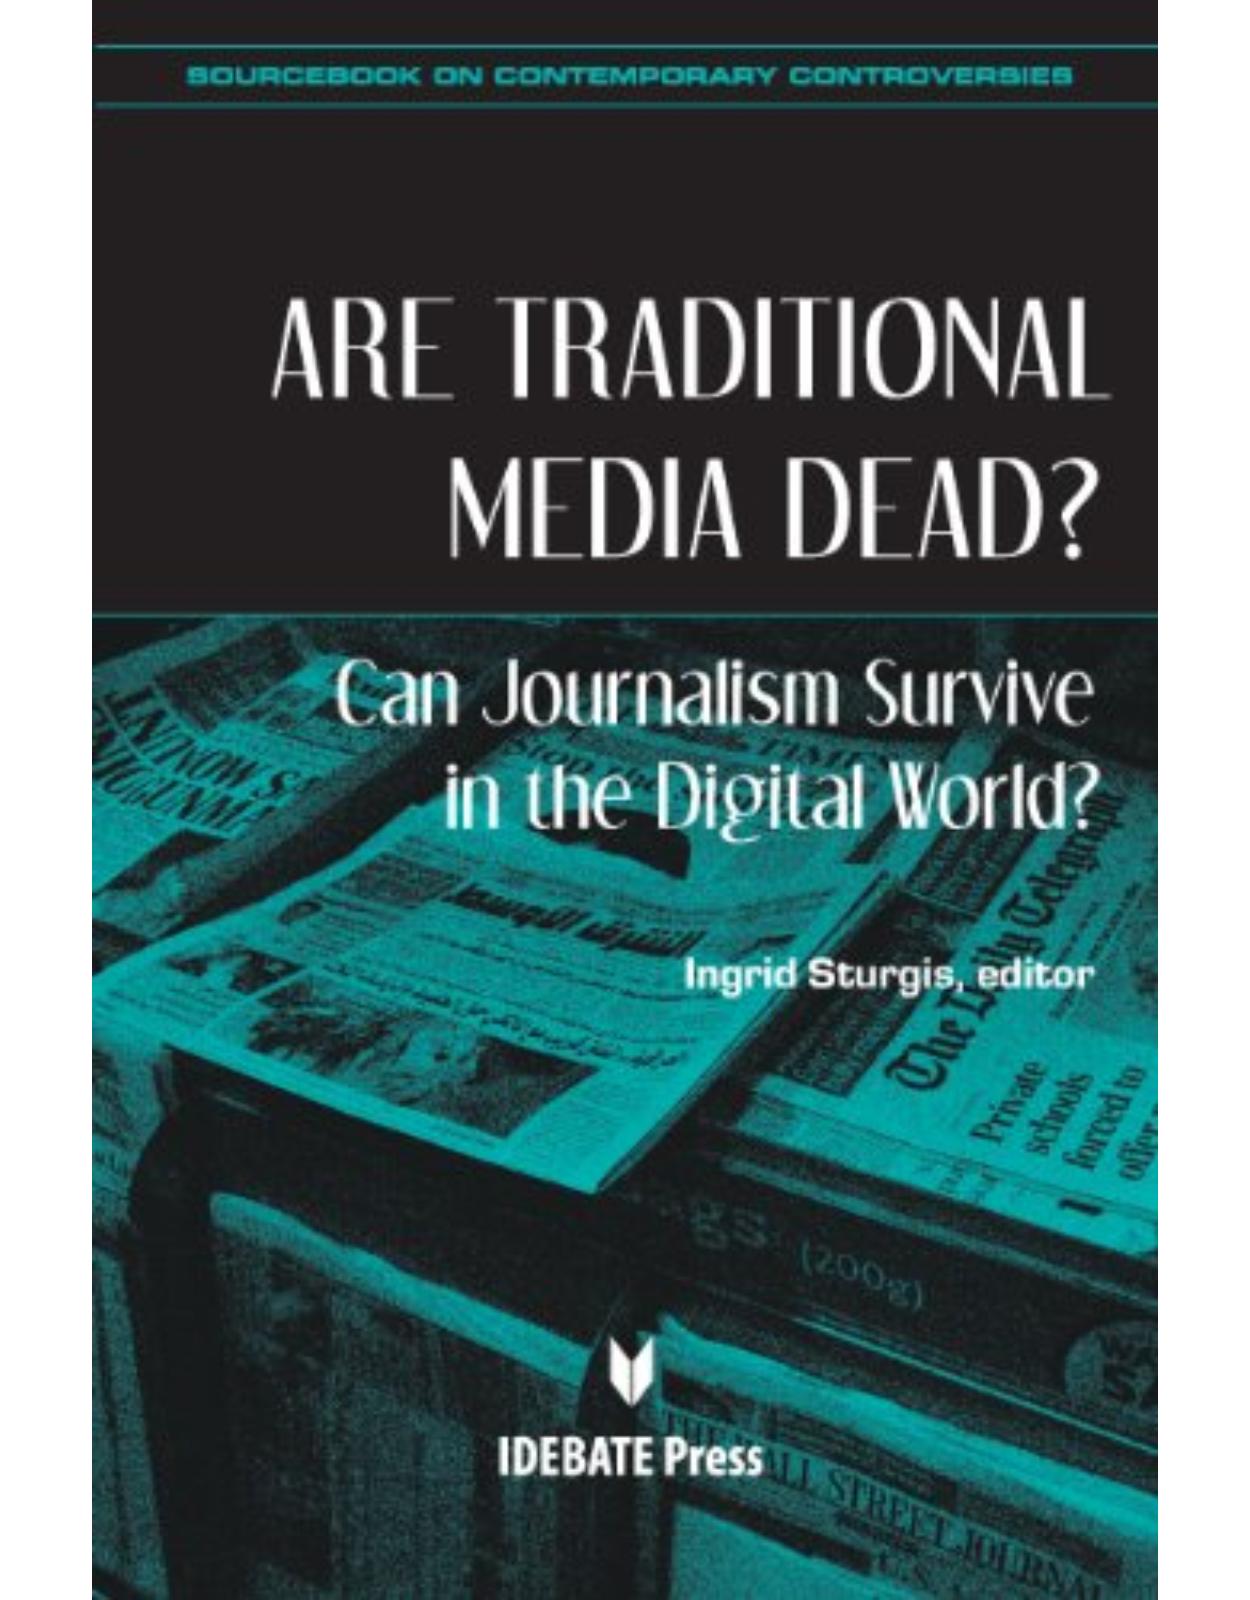 Are Traditional Media Dead? Can Journalism Survive in the Digital World? (Sourcebook on Contemporary Controversies)